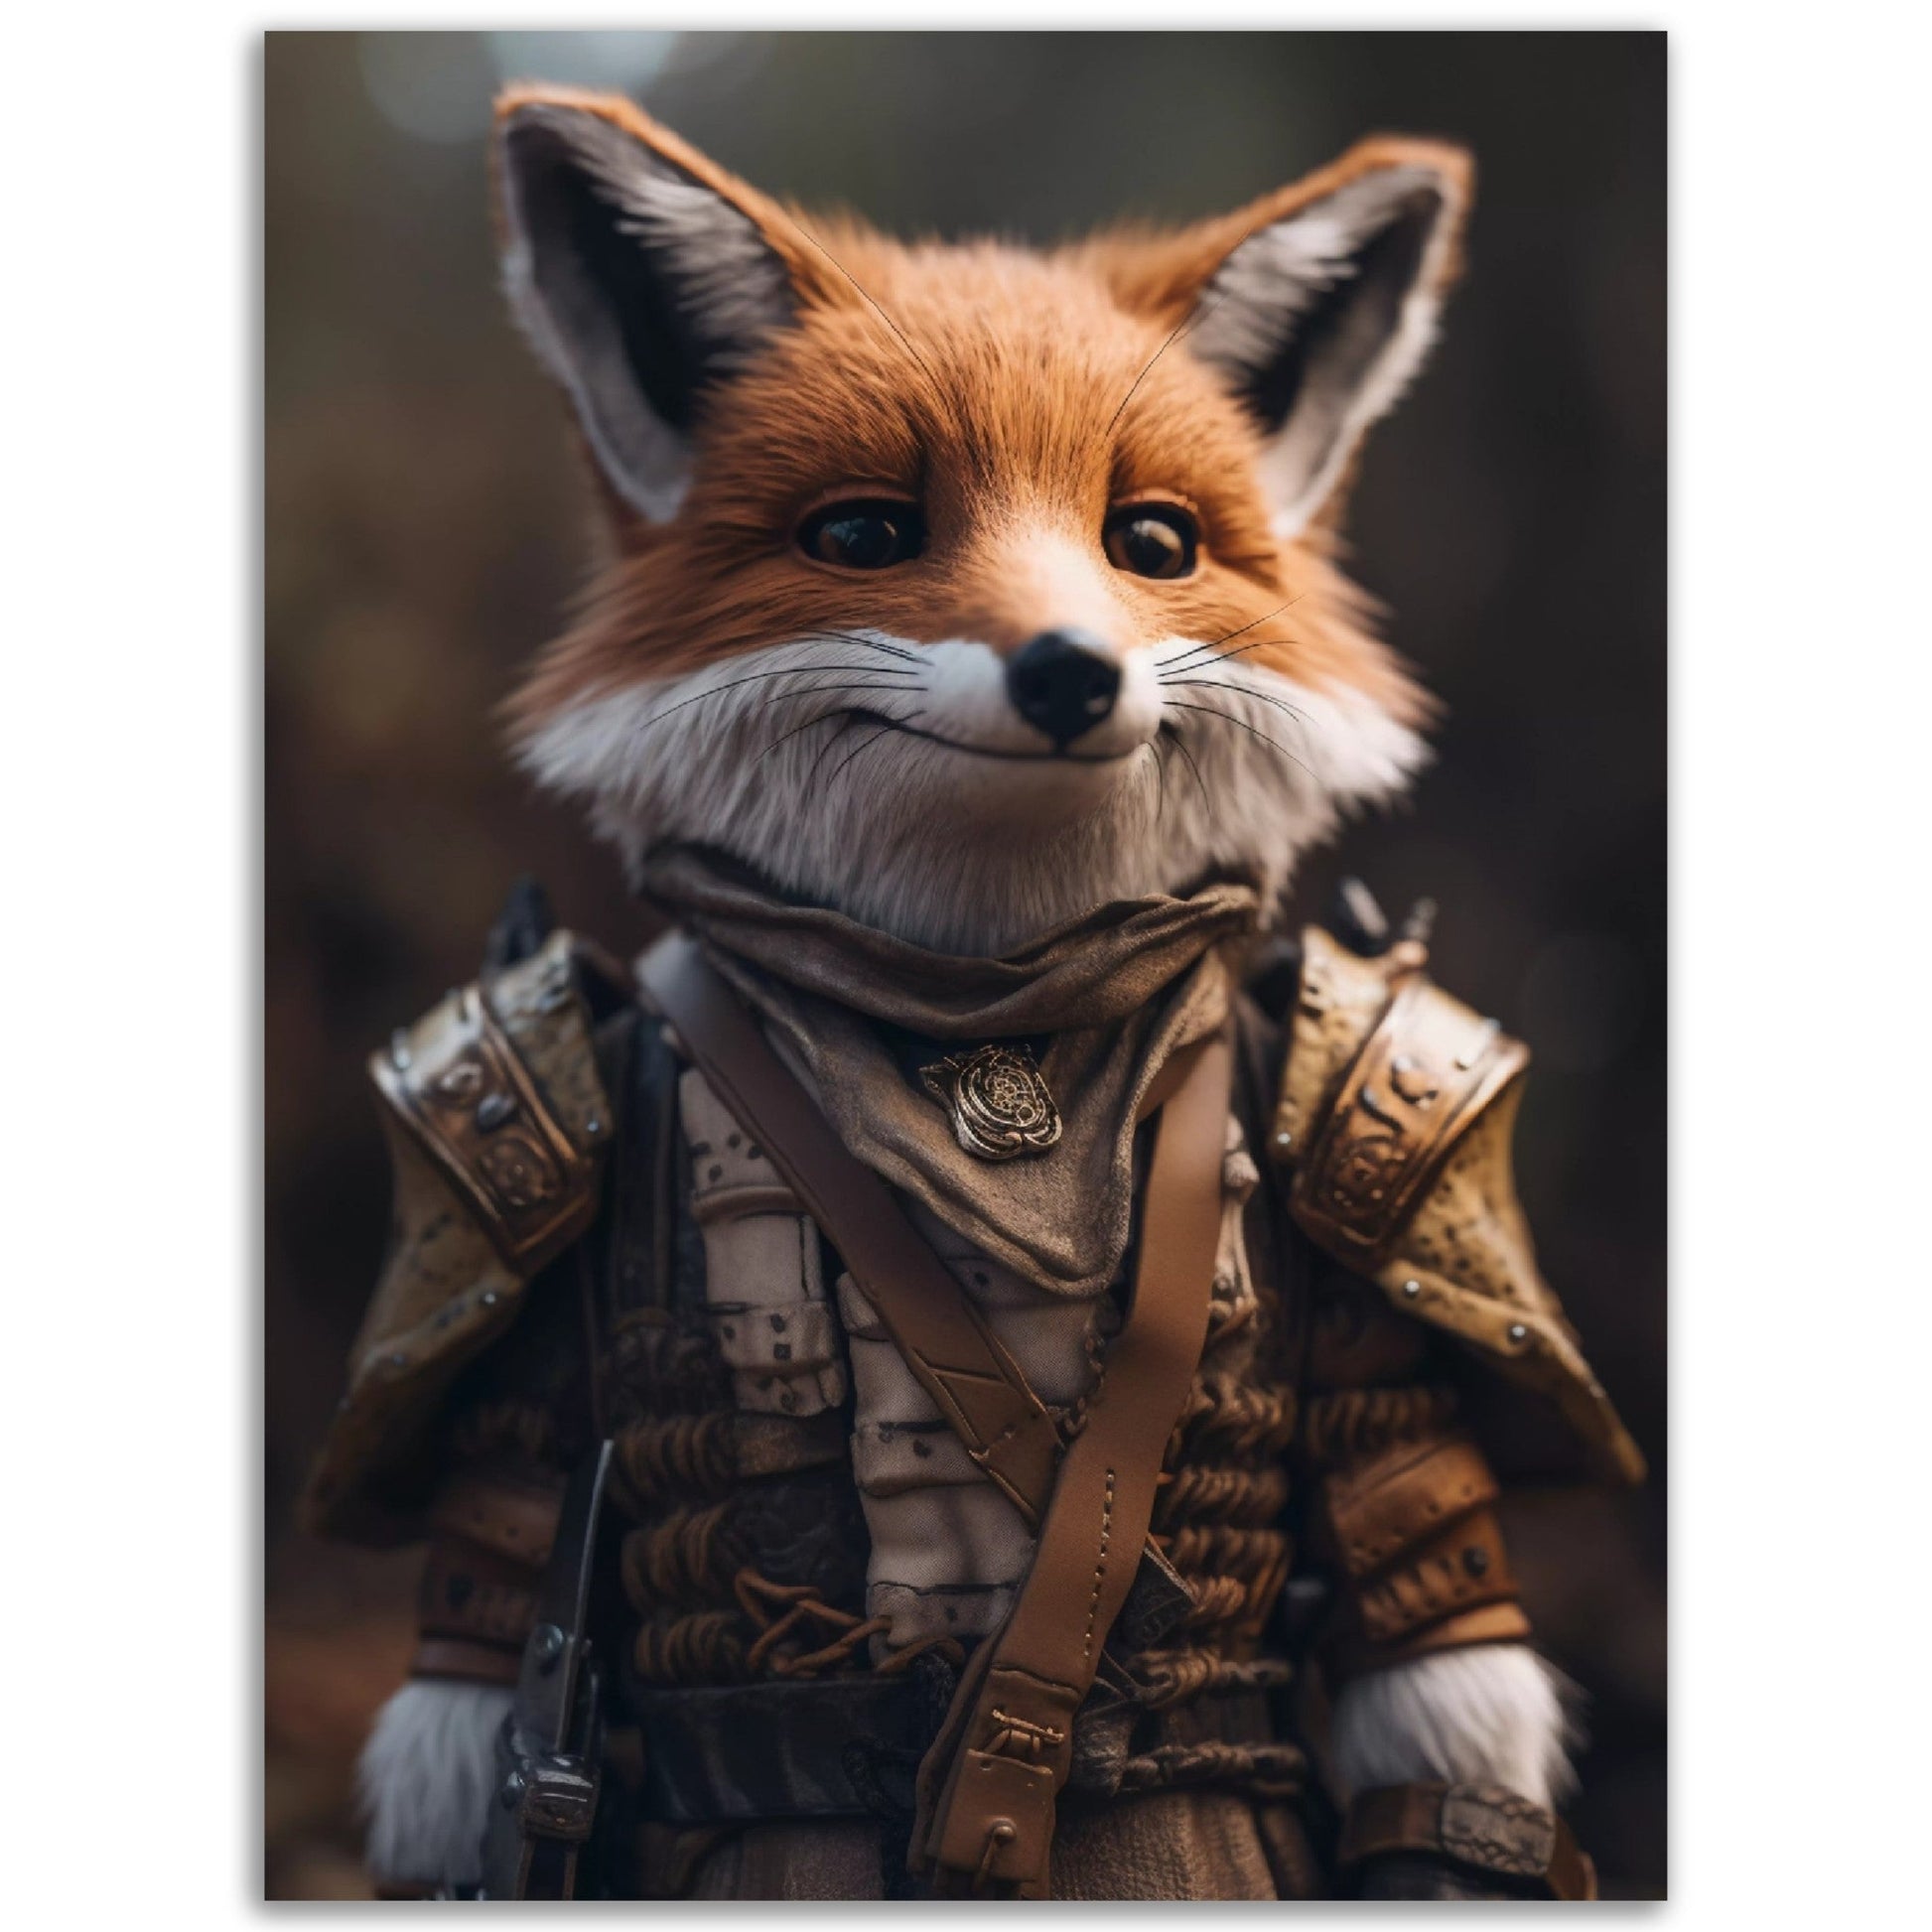 A stunning Adventurer Mr. Fox poster in armor, perfect for wall art.